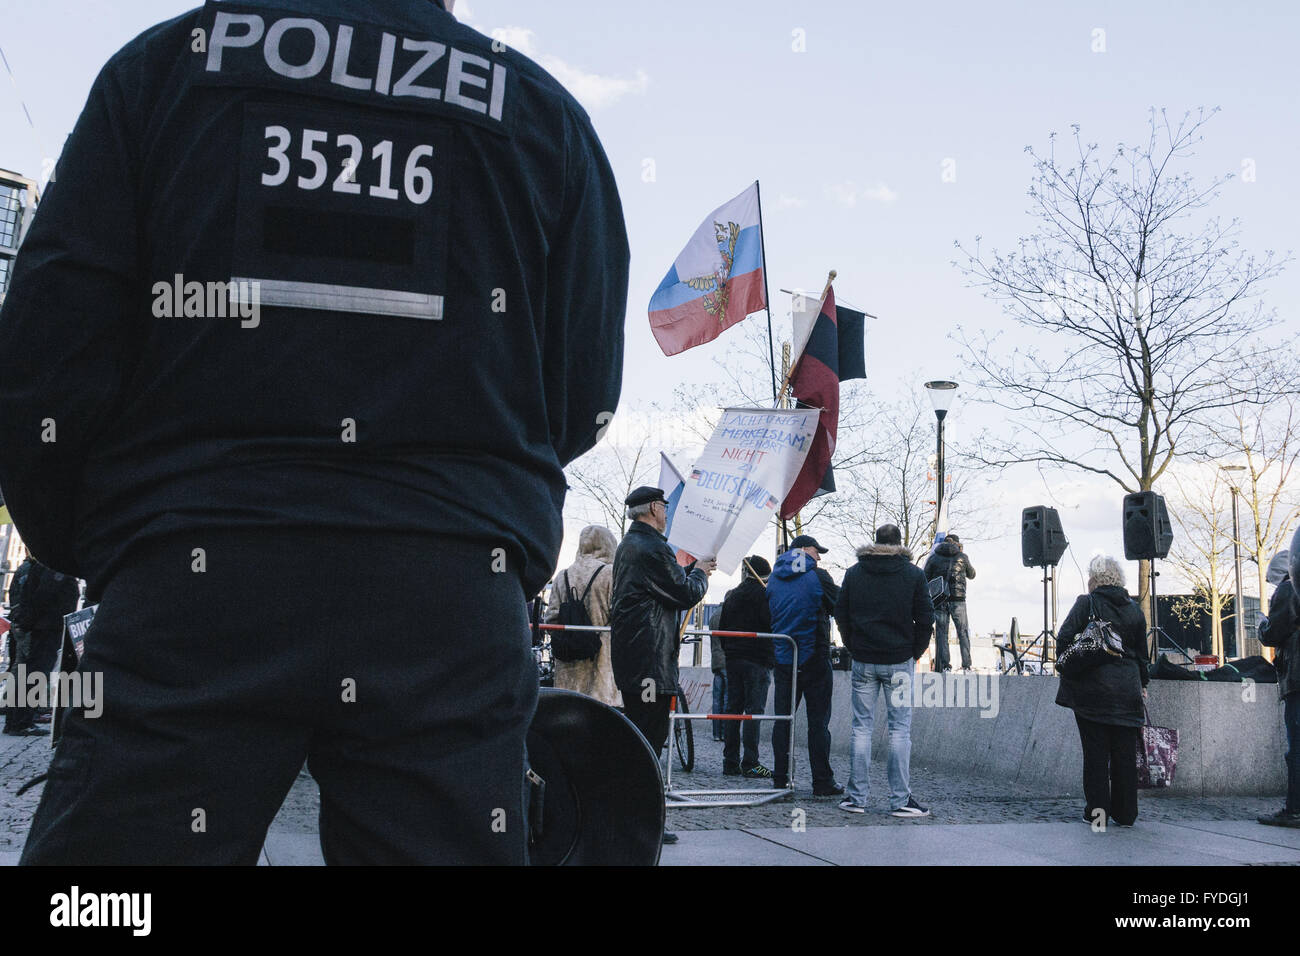 Berlin, Berlin, Germany. 25th Apr, 2016. Protesters behind a policeman during the right-wing Baergida Rally in front of Berlin Central Station. Baergida, an Anti-Islamic, anti-immigration, far-right movement meet for the 69th time since their first rally in January 2015. © Jan Scheunert/ZUMA Wire/Alamy Live News Stock Photo